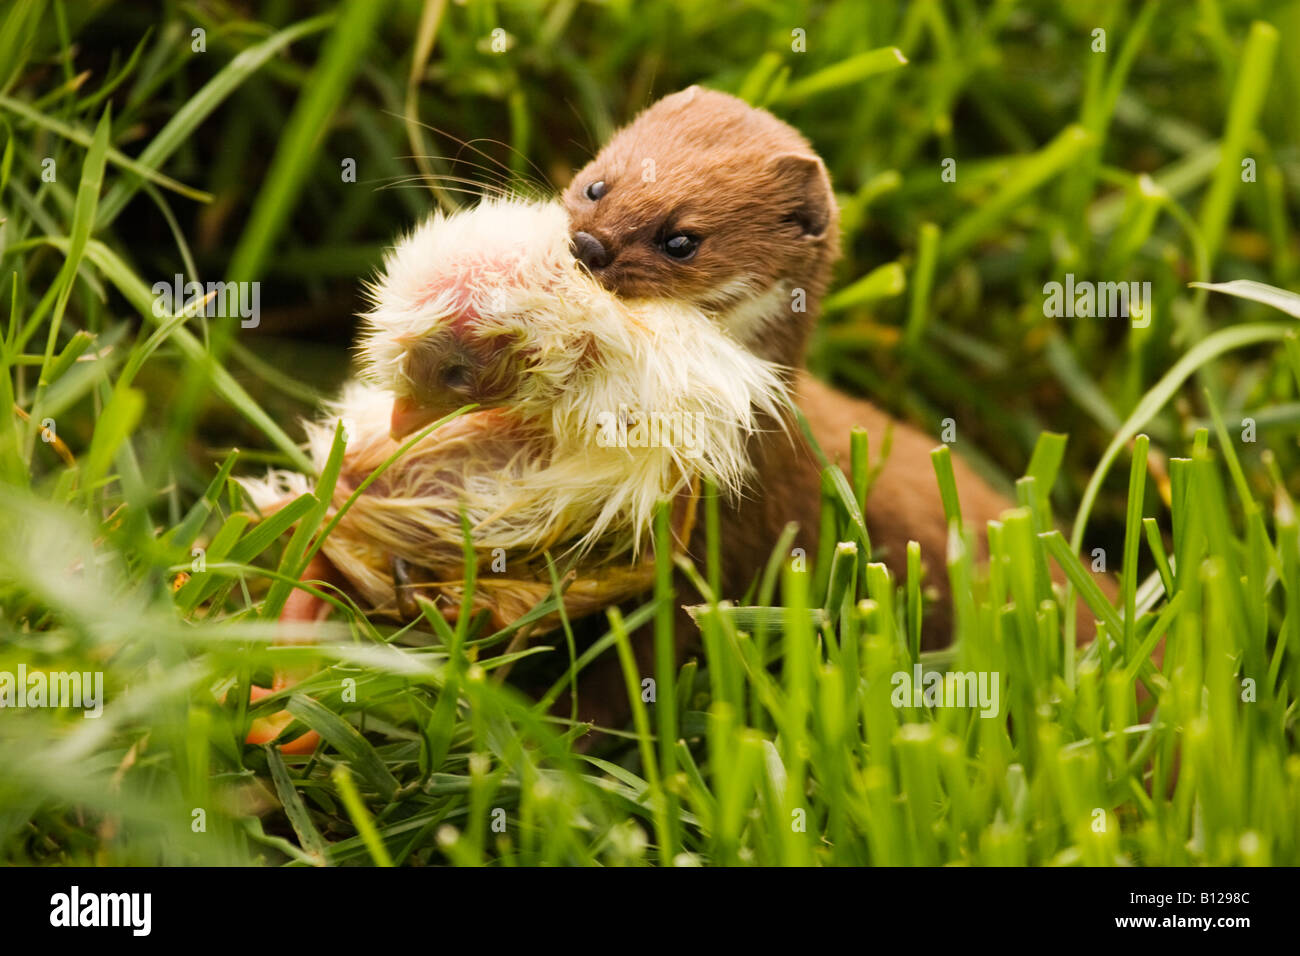 Weasel, Mustela nivalis, carrying dead chicken in its mouth Stock Photo